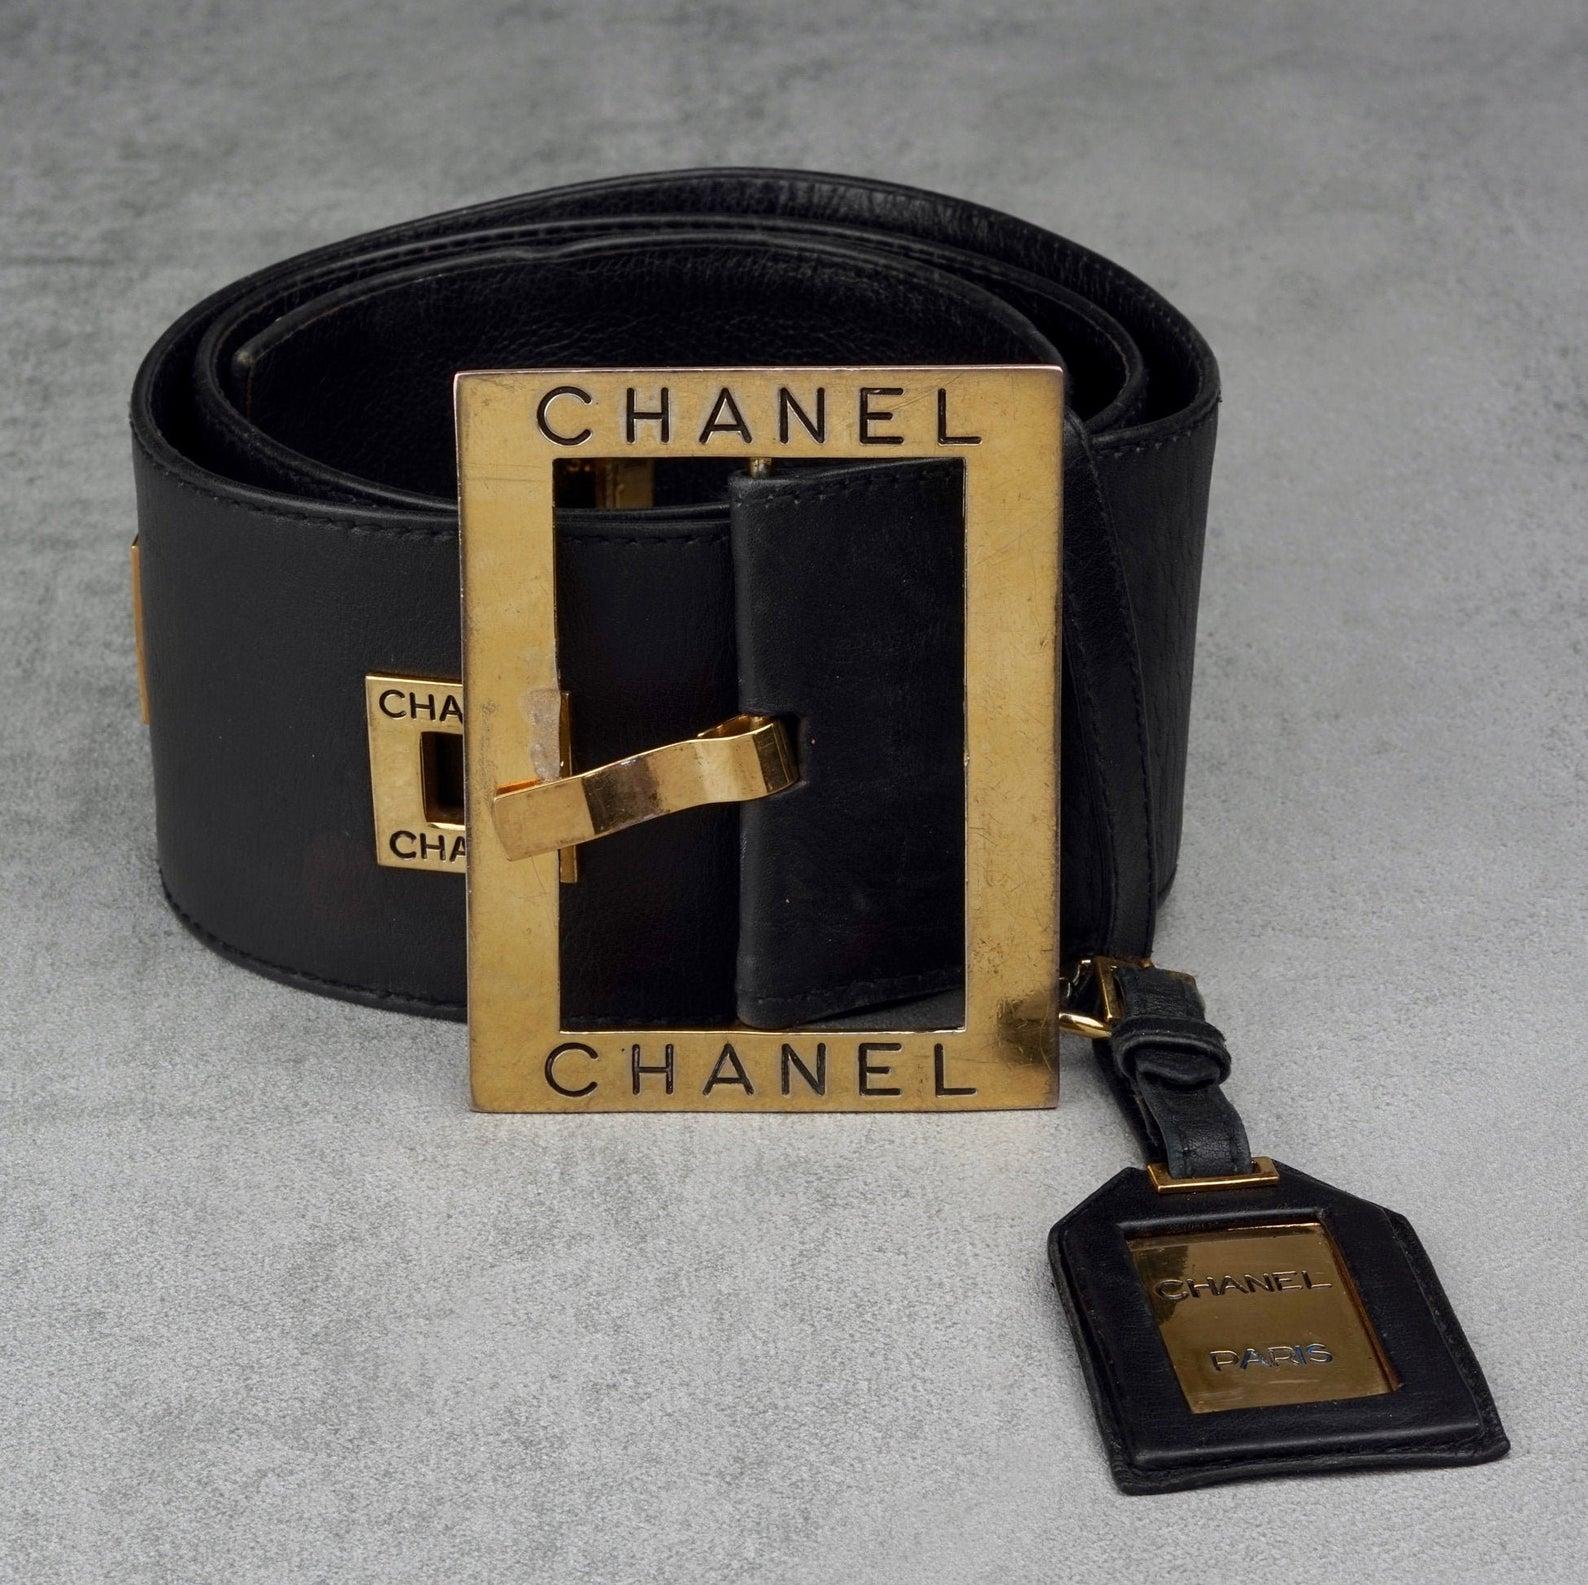 Vintage 1993 CHANEL Luggage Tag Logo Belt

Measurements:
Buckle Height: 3.46 inches (8.8 cm)
Strap Height: 2.56 inches (6.5 cm)
Wearable Length: 20.47 inches to 34.64 inches (52 cm to 88 cm)
*** 7 cm in between each holes

Features:
- 100% Authentic